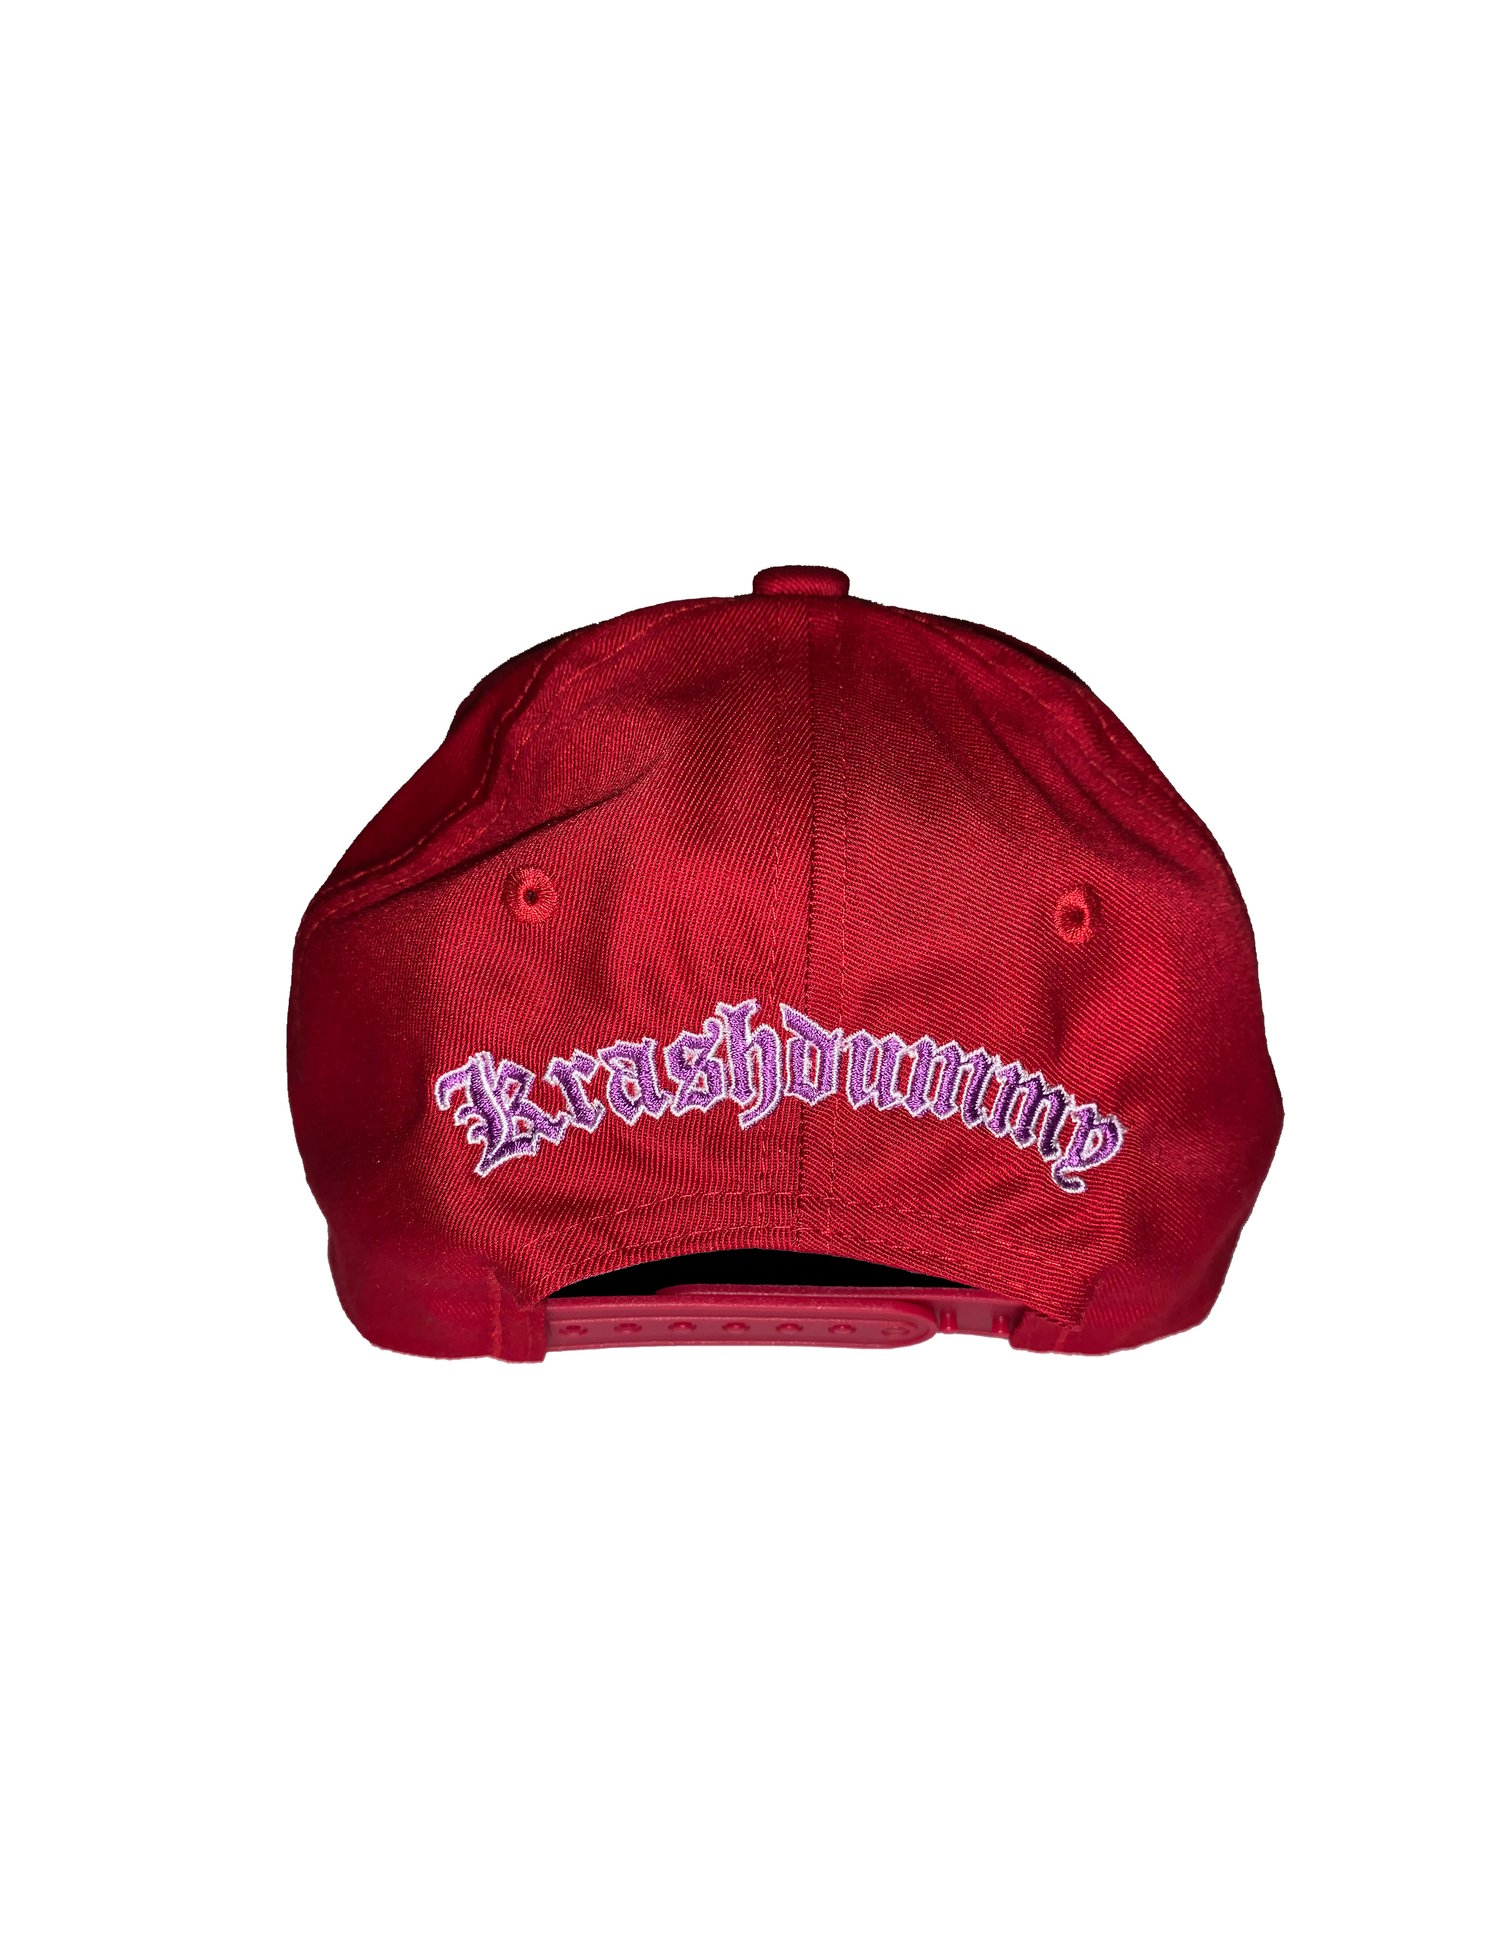 Image of Red Snapback